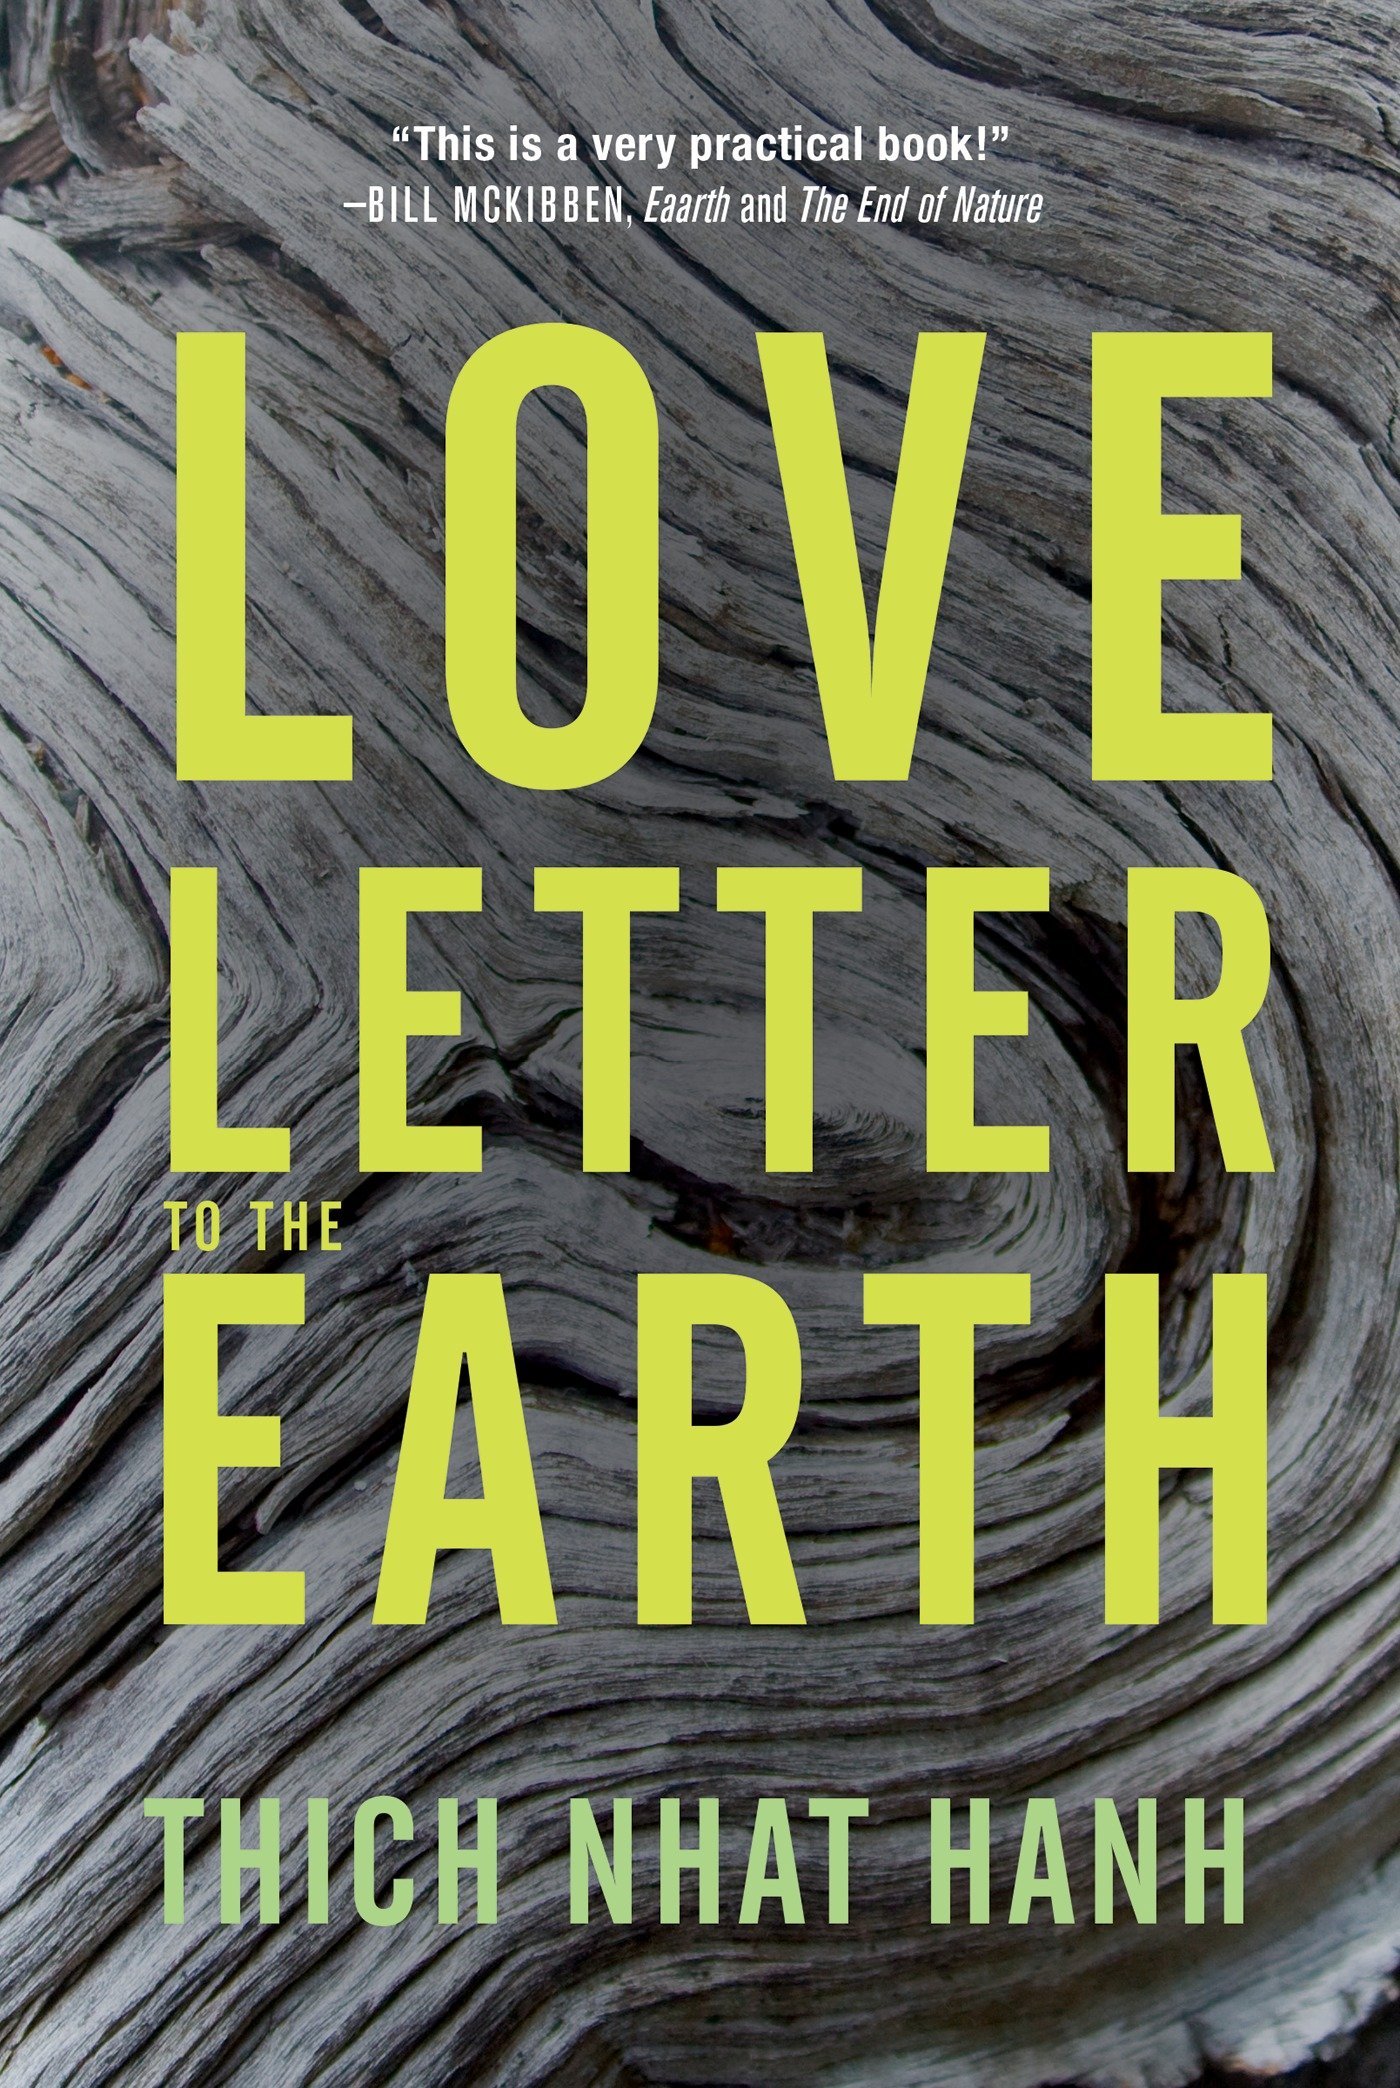 Thich Nhat Hanh, Thích Nhất Hạnh: Love Letter to the Earth